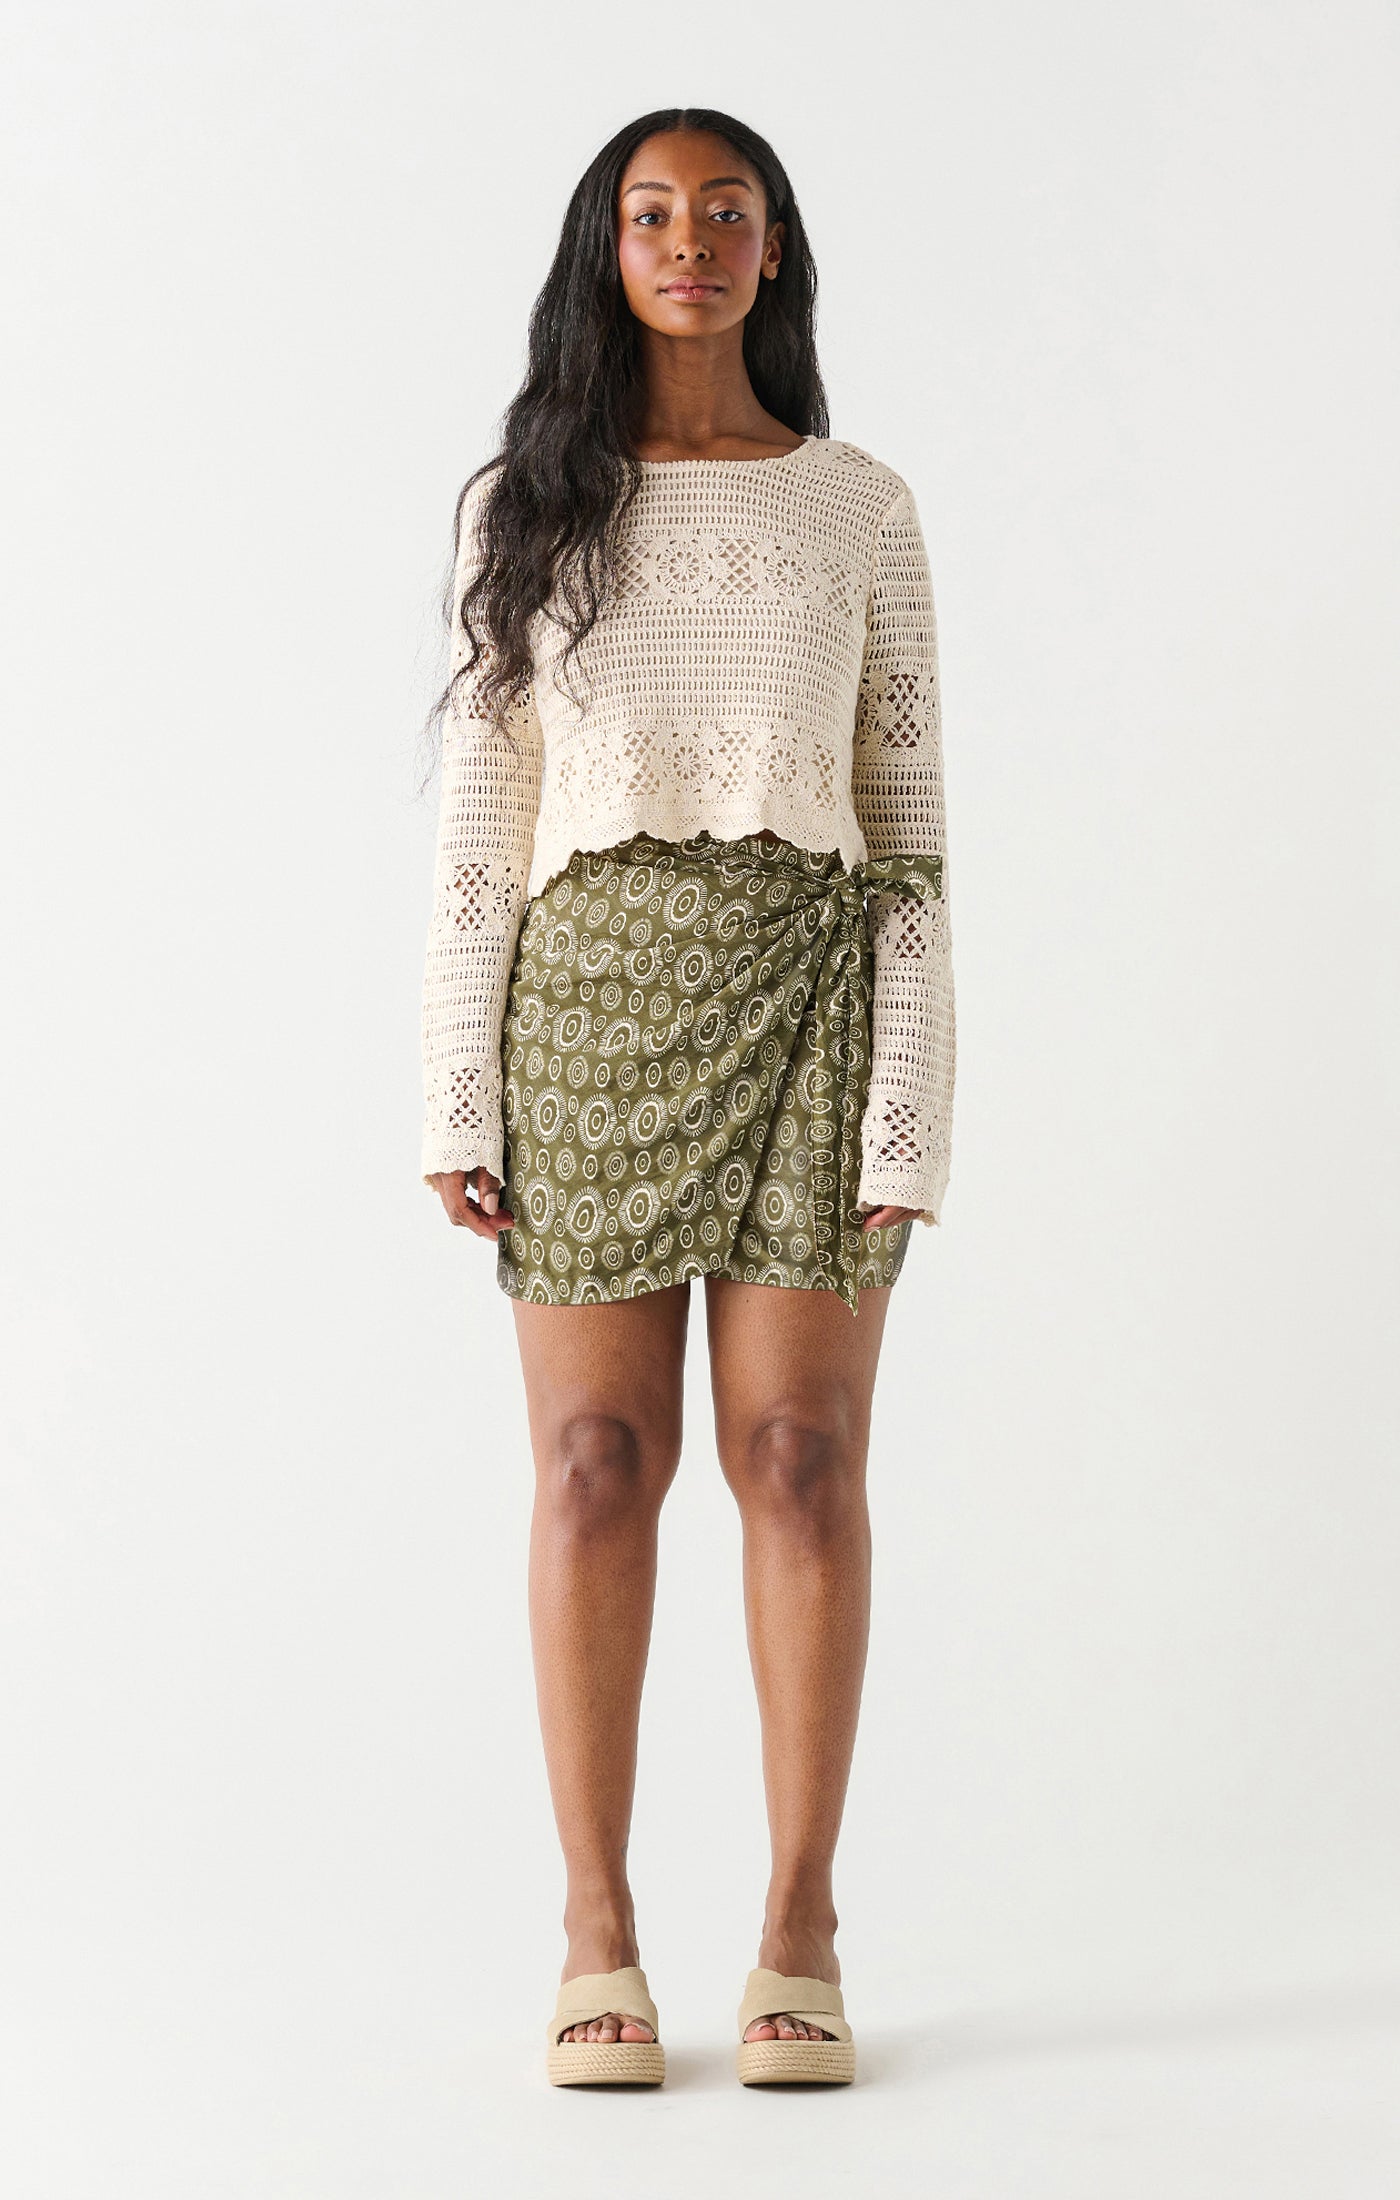 Printed Skort With Knot